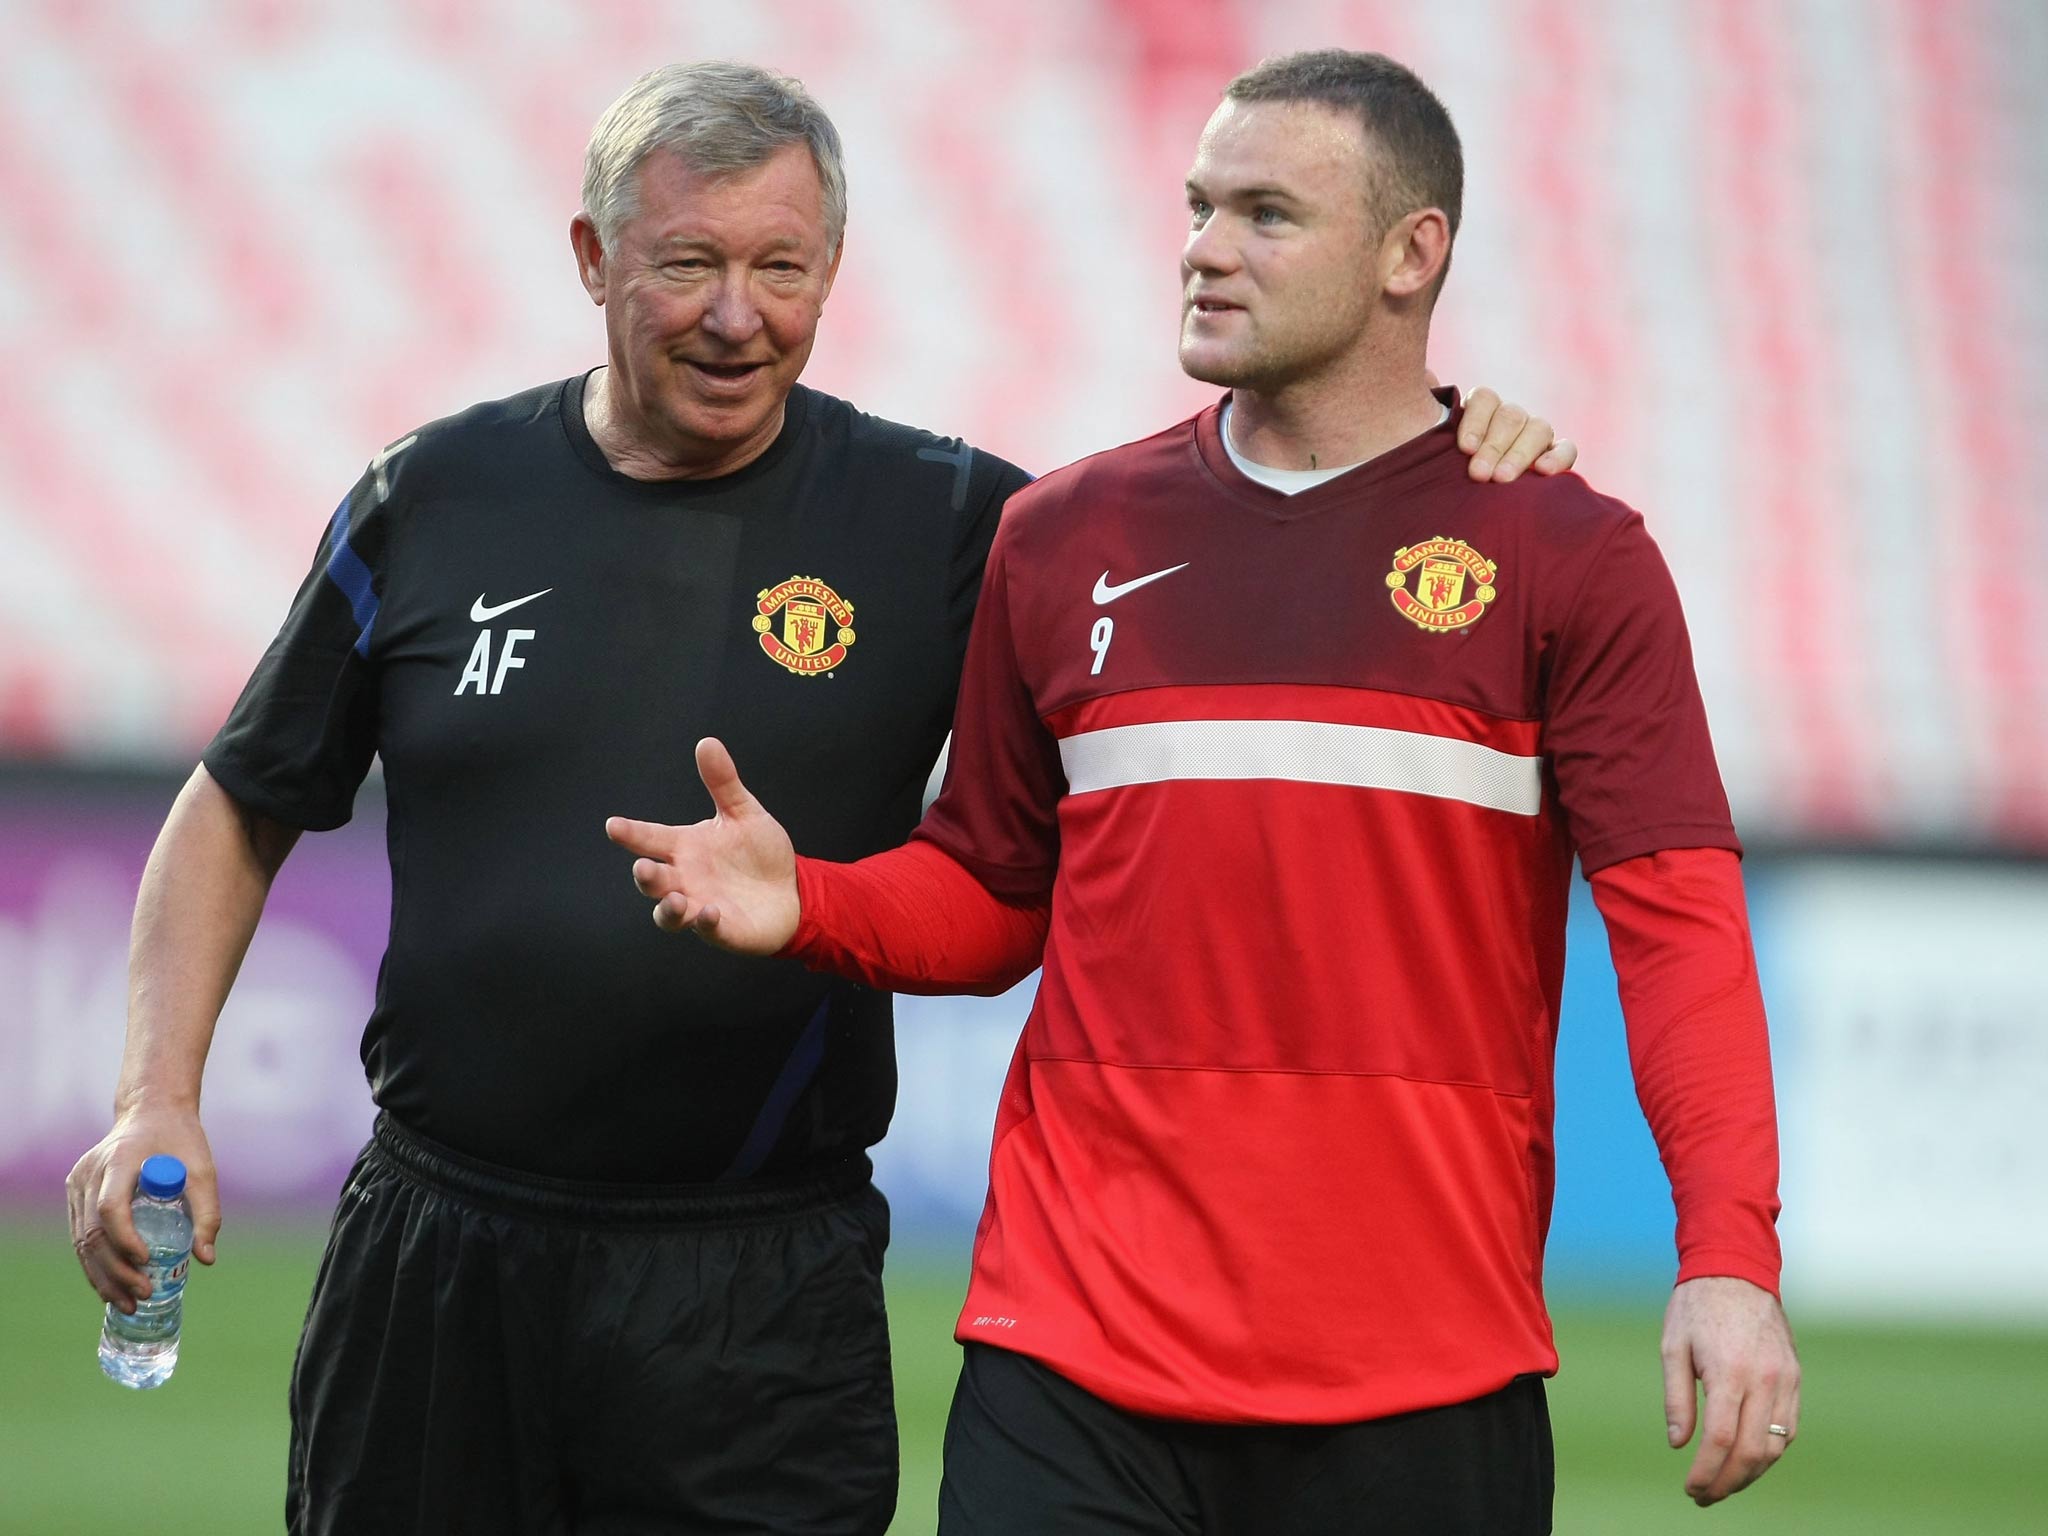 Wayne Rooney: Ferguson has always been prepared to move on good players and Rooney, it appears, may be about to find that he is as dispensable as the others that feature on this list. The relationship between the manager and former star strik